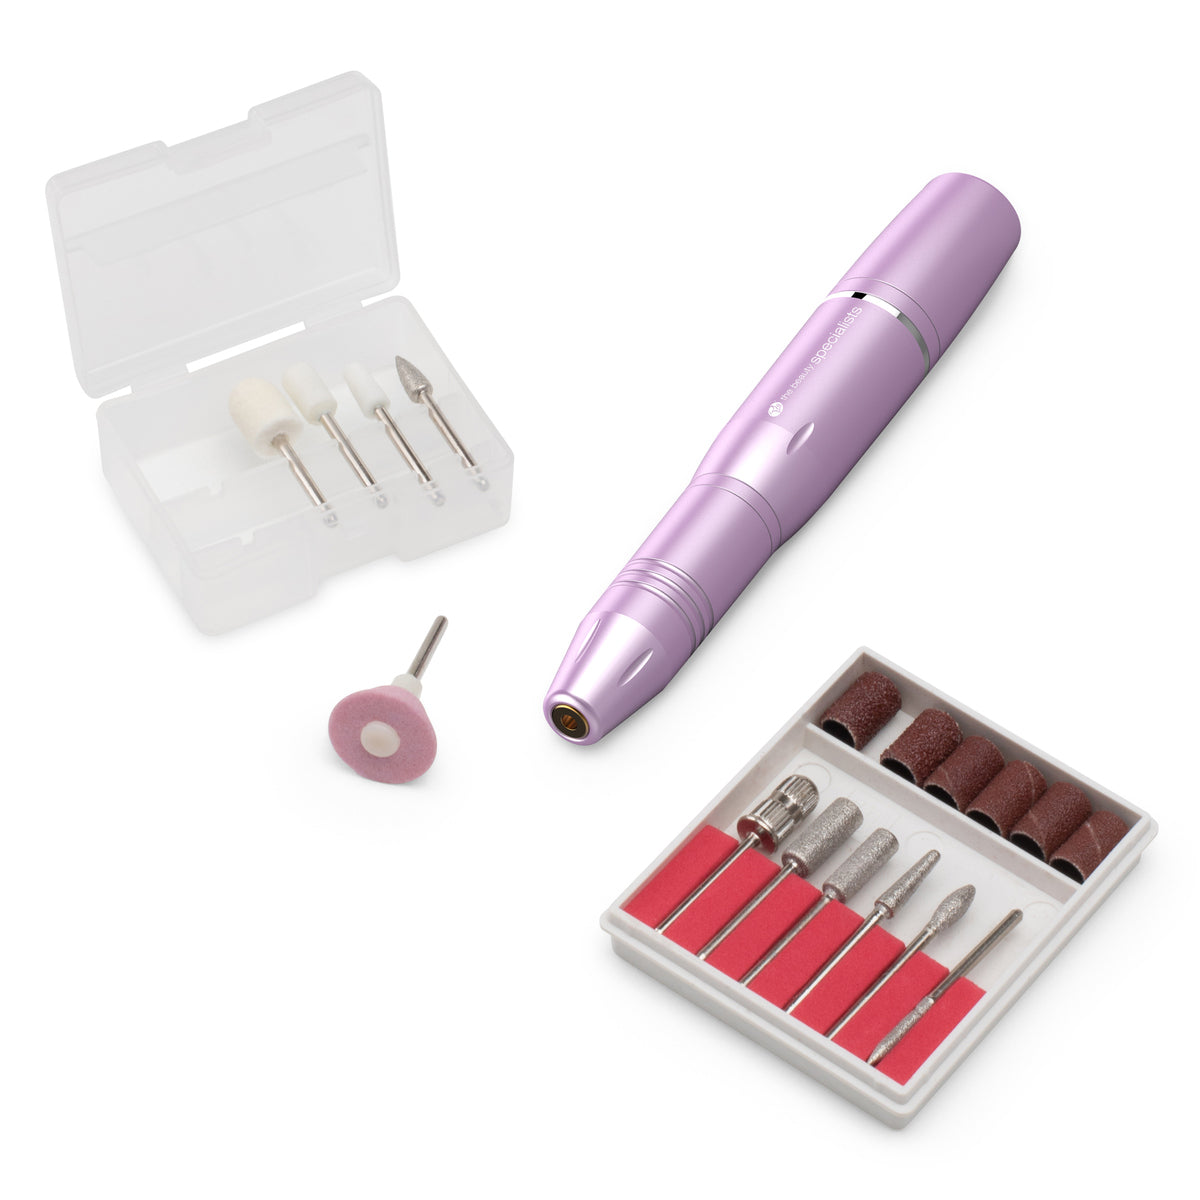 Electric Nail Drill with Electric Nail File Head Attachments